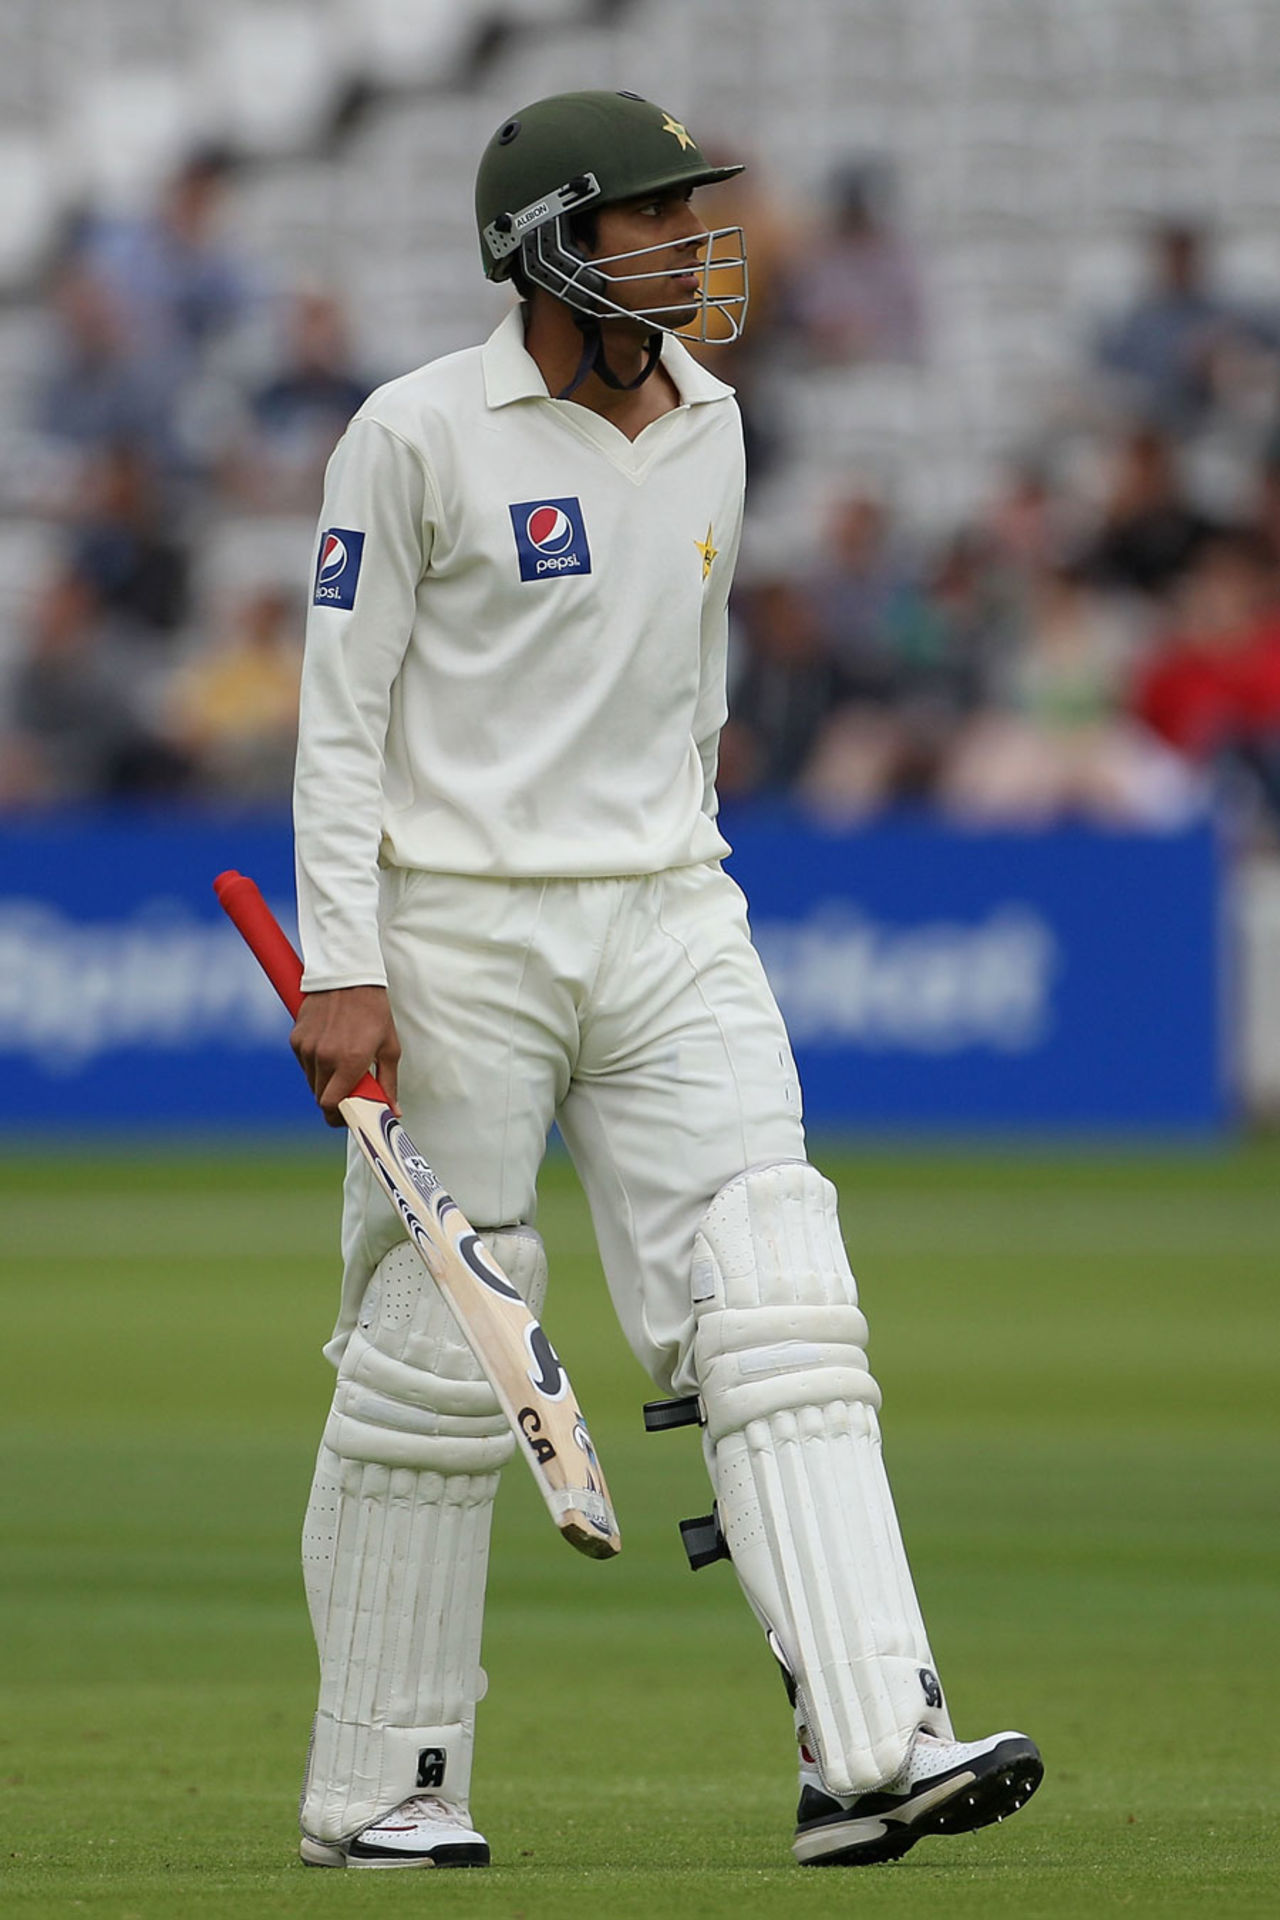 Umar Amin troops off after being caught behind off Mitchell Johnson for 1, Pakistan v Australia, 1st Test, Lord's, July 14, 2010